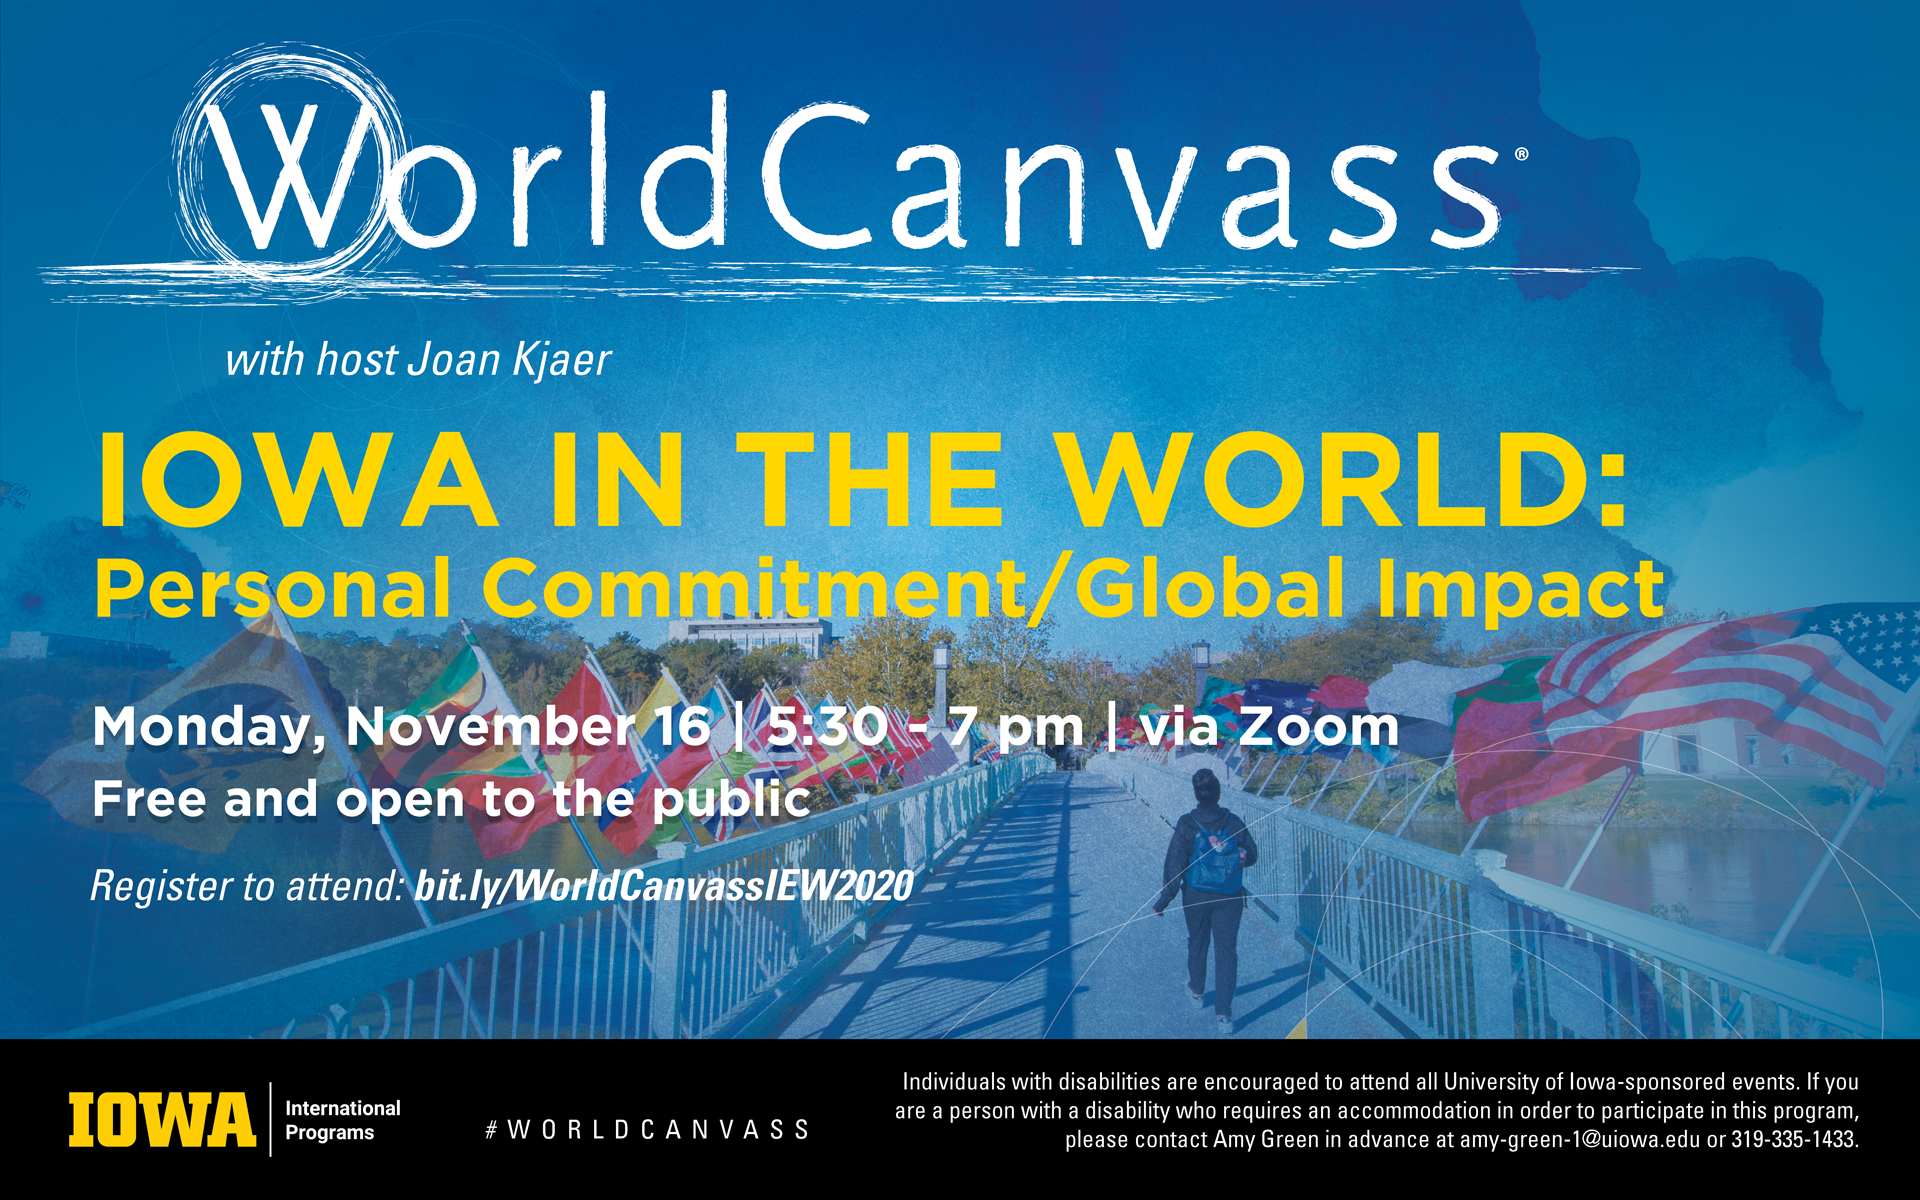 World Canvass presents Iowa in the World: Personal Commitment and Global Impact. Monday November 16th from 5:30pm to 7pm. Meeting via Zoom. Open and free to the public. Register to attend: bit.ly/WorldCanvassIEW2020